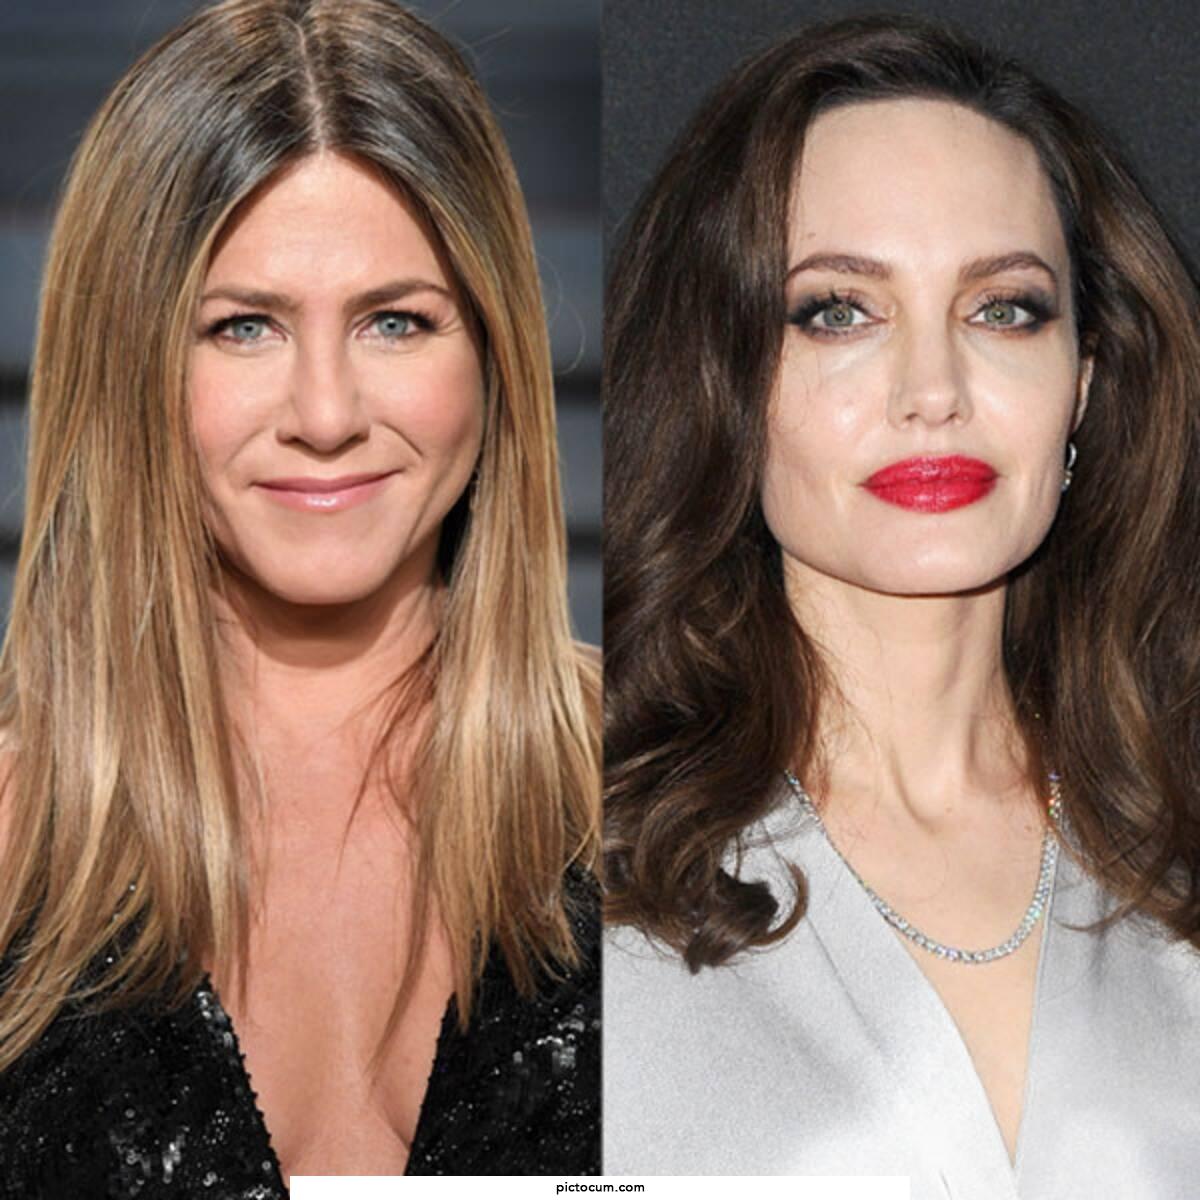 Would you rather give facial to Jennifer or Angelina?